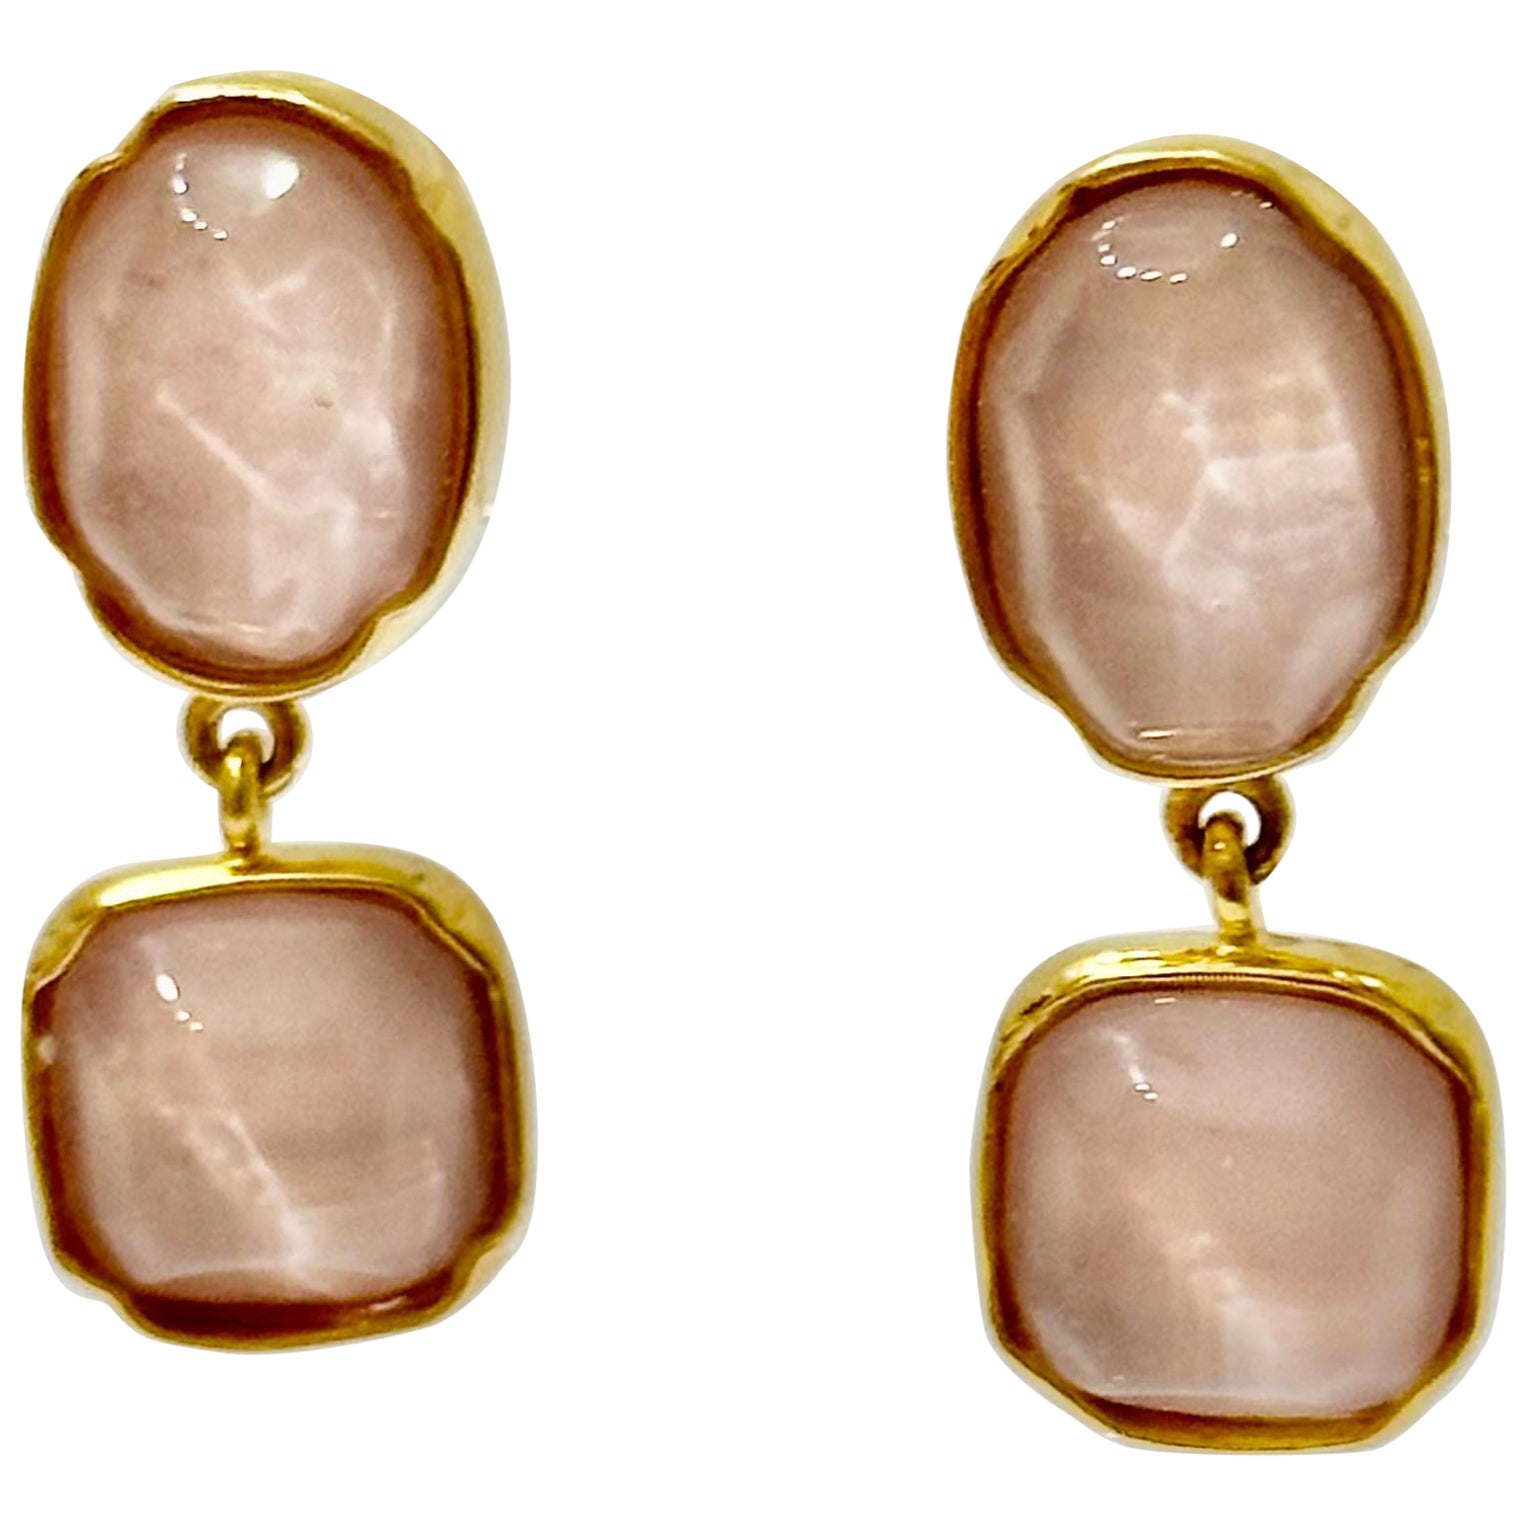 A timeless theme that sees its colors vary according to the seasons. Each crystal rock stone is hand-dyed with beautiful shades. As every stone is unique, color intensity and depth will depend on the particularity of the stone. Earrings in brass